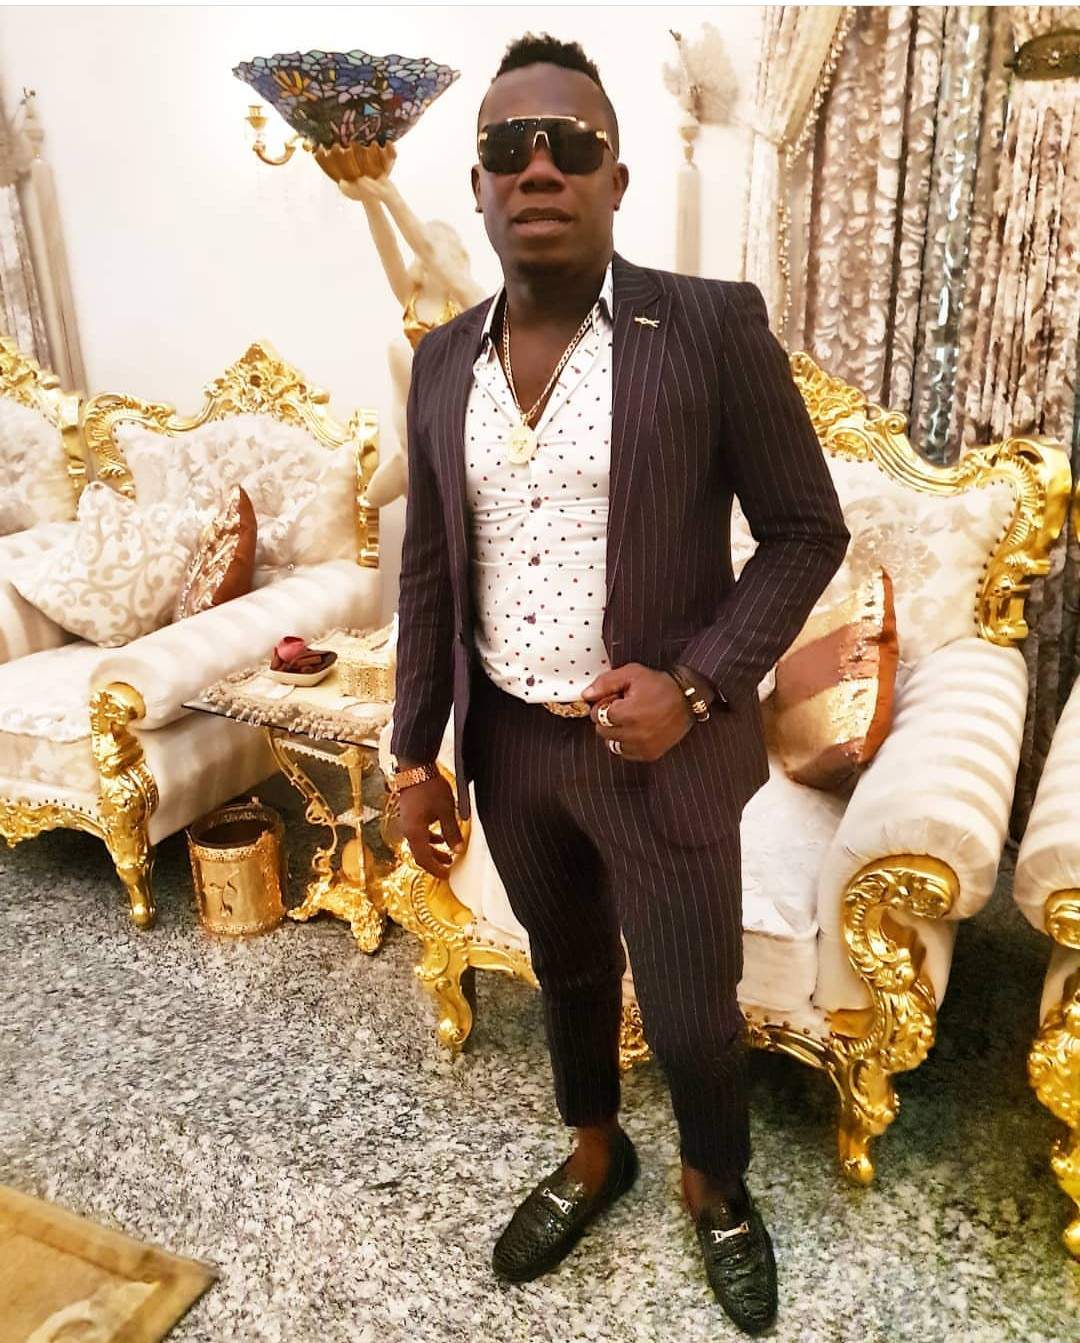 'After enough beating, Imo State Police officers collected 22k dollars cash from me' - Duncan Mighty speaks on his arrest